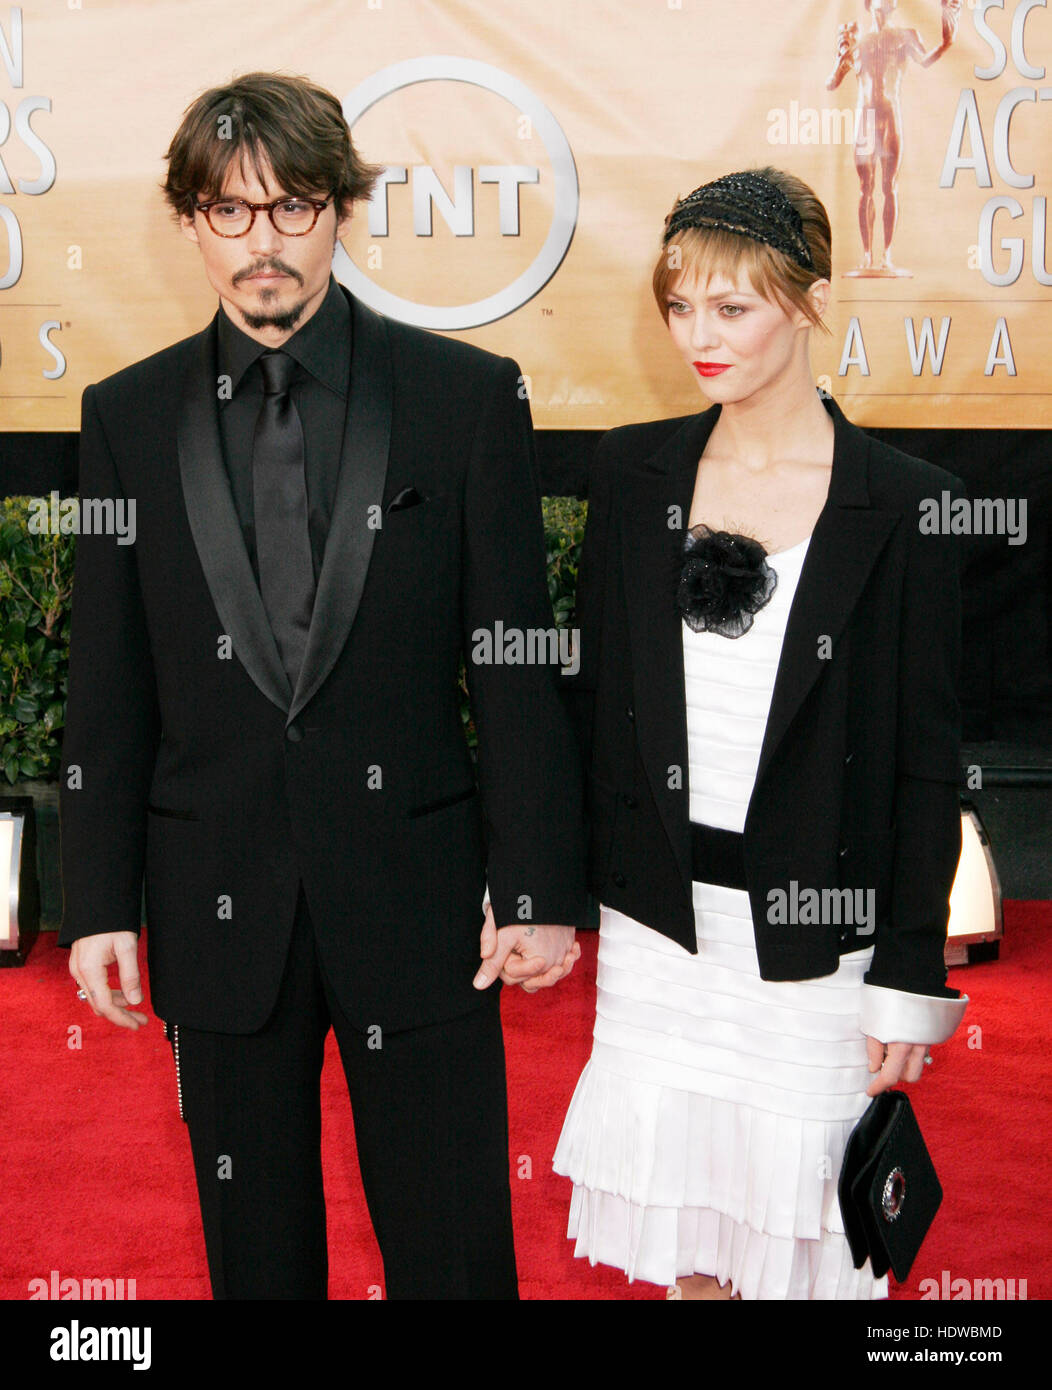 Actor Johnny Depp, left, and Vanessa Paradis arrive during the 11th annual Screen Actors Guild awards at the Shrine Auditorium in Los Angeles, California on Saturday 05 February, 2005. Bildnachweis: Francis Specker Stockfoto